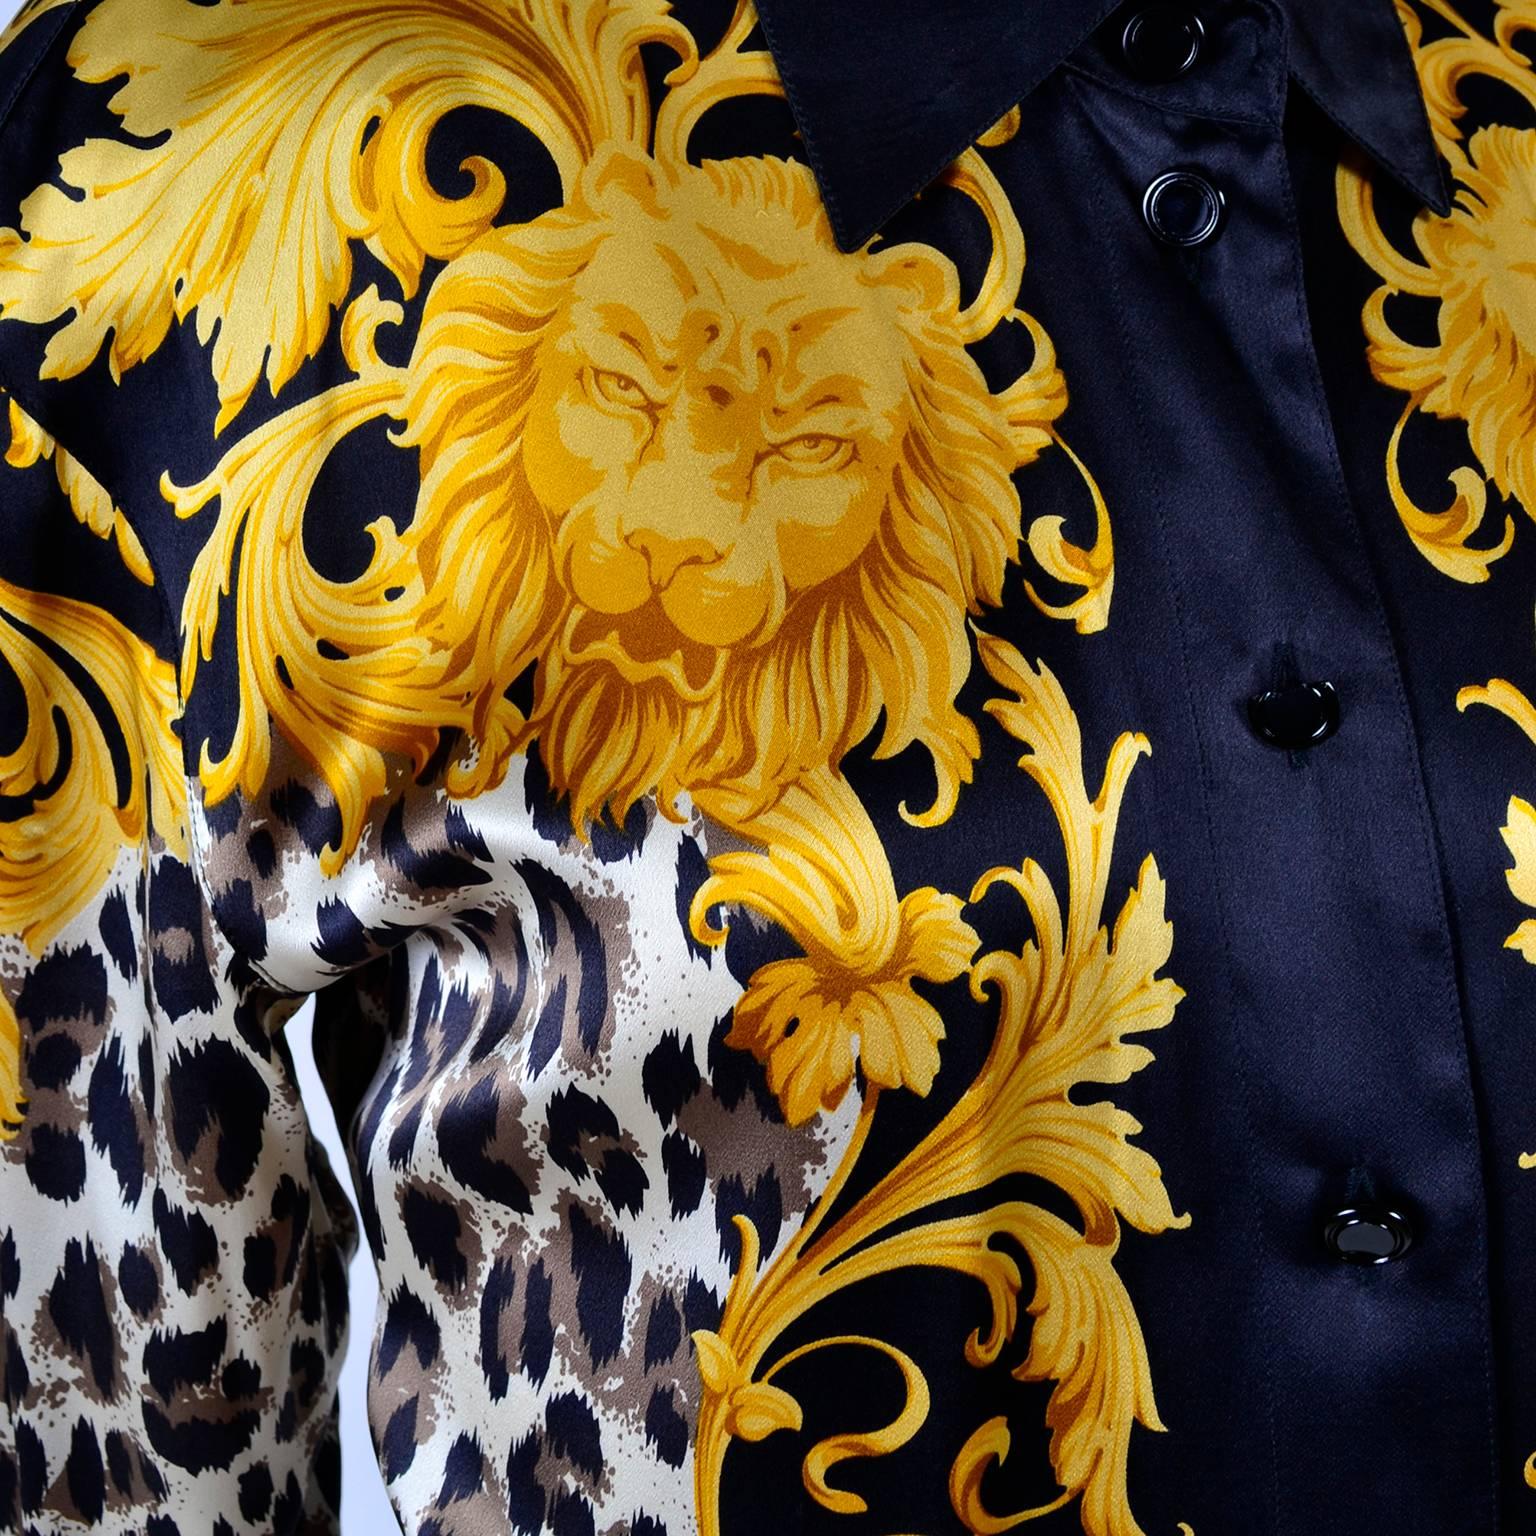 This vintage Escada silk blouse was designed by Margaretha Ley for Escada in the 1980's.  The blouse is in a baroque black and brown animal print with yellow lion faces and leaves. This beautiful blouse has solid black cuffs and collar and we also